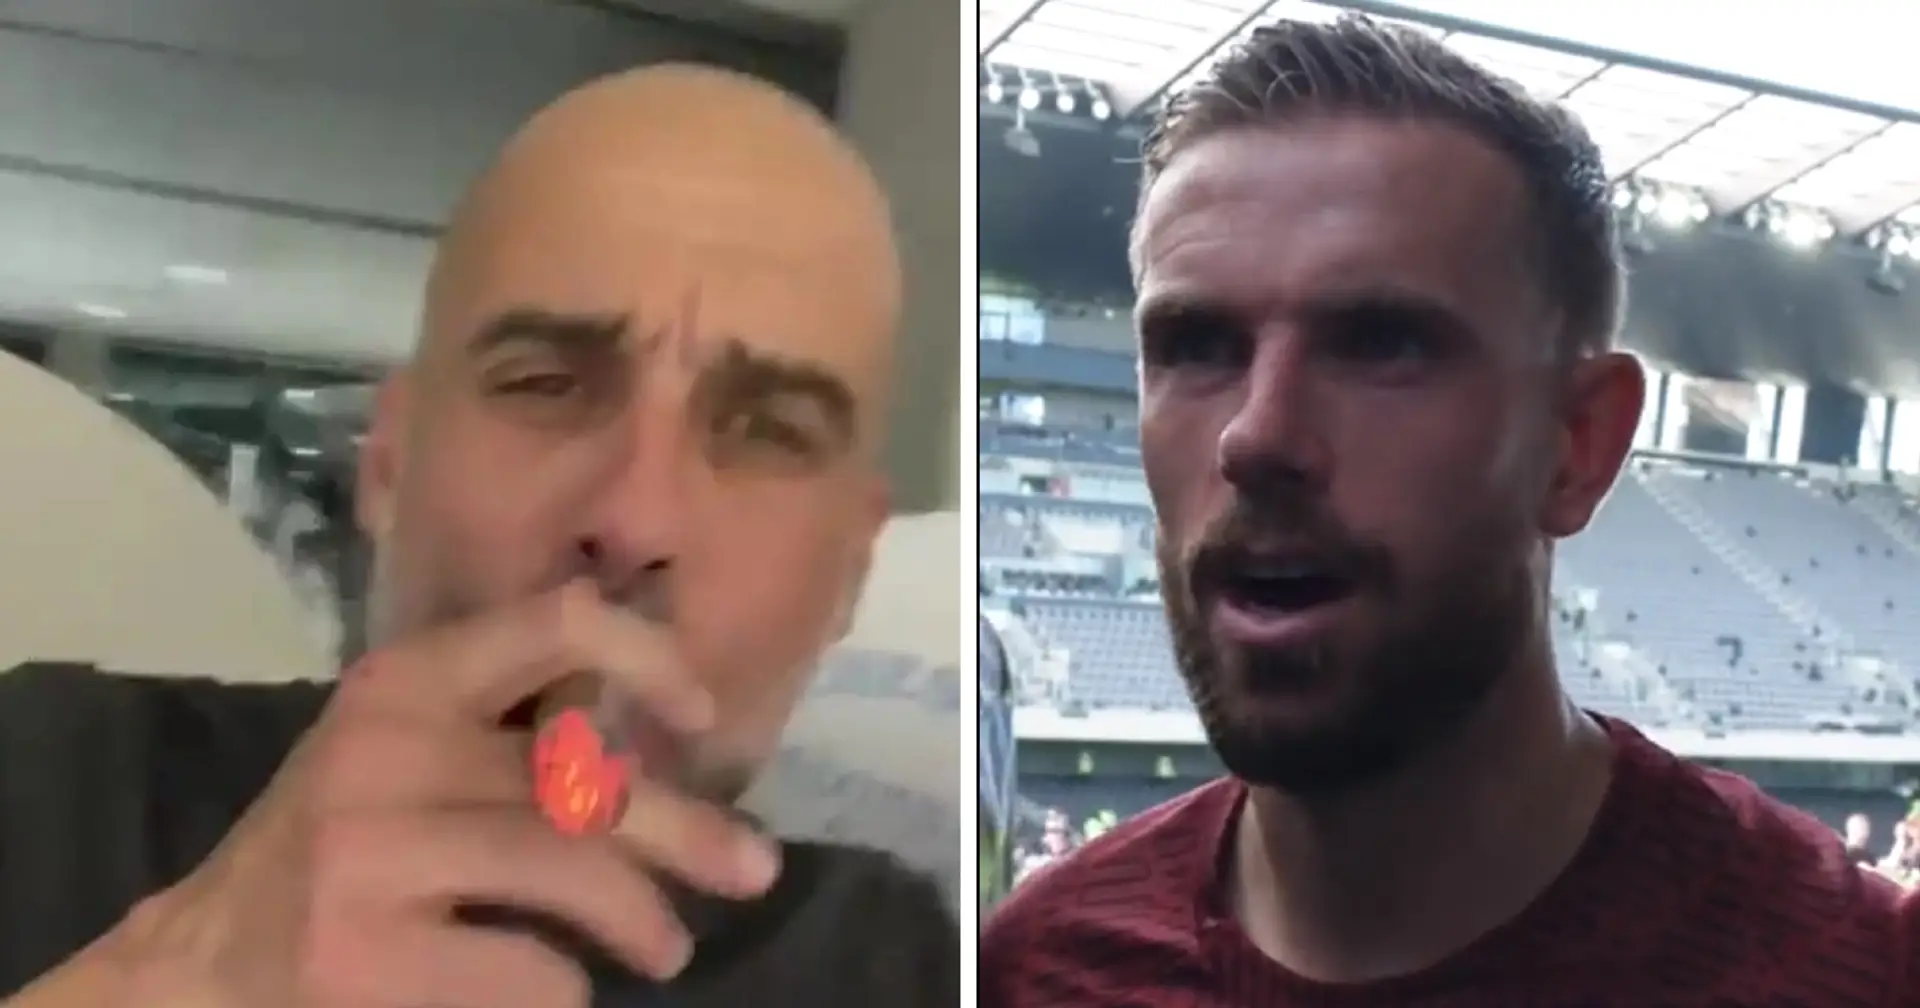 'That's why Pep won title every year': Liverpool fan goes viral with Henderson-bashing tweet